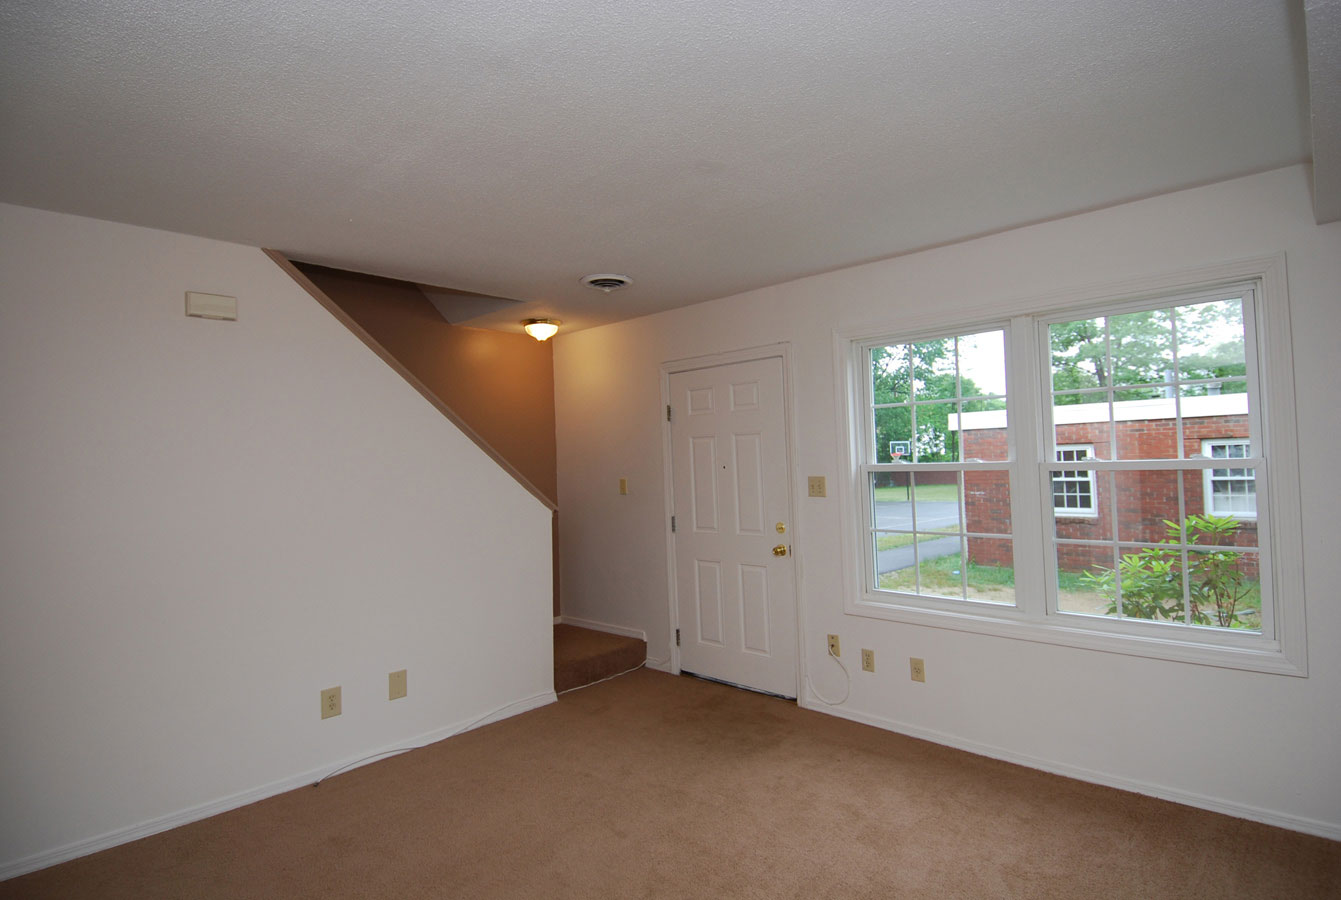 Living Room - 2 Bedroom Townhouse, Wellington Terrace, Manchester NH